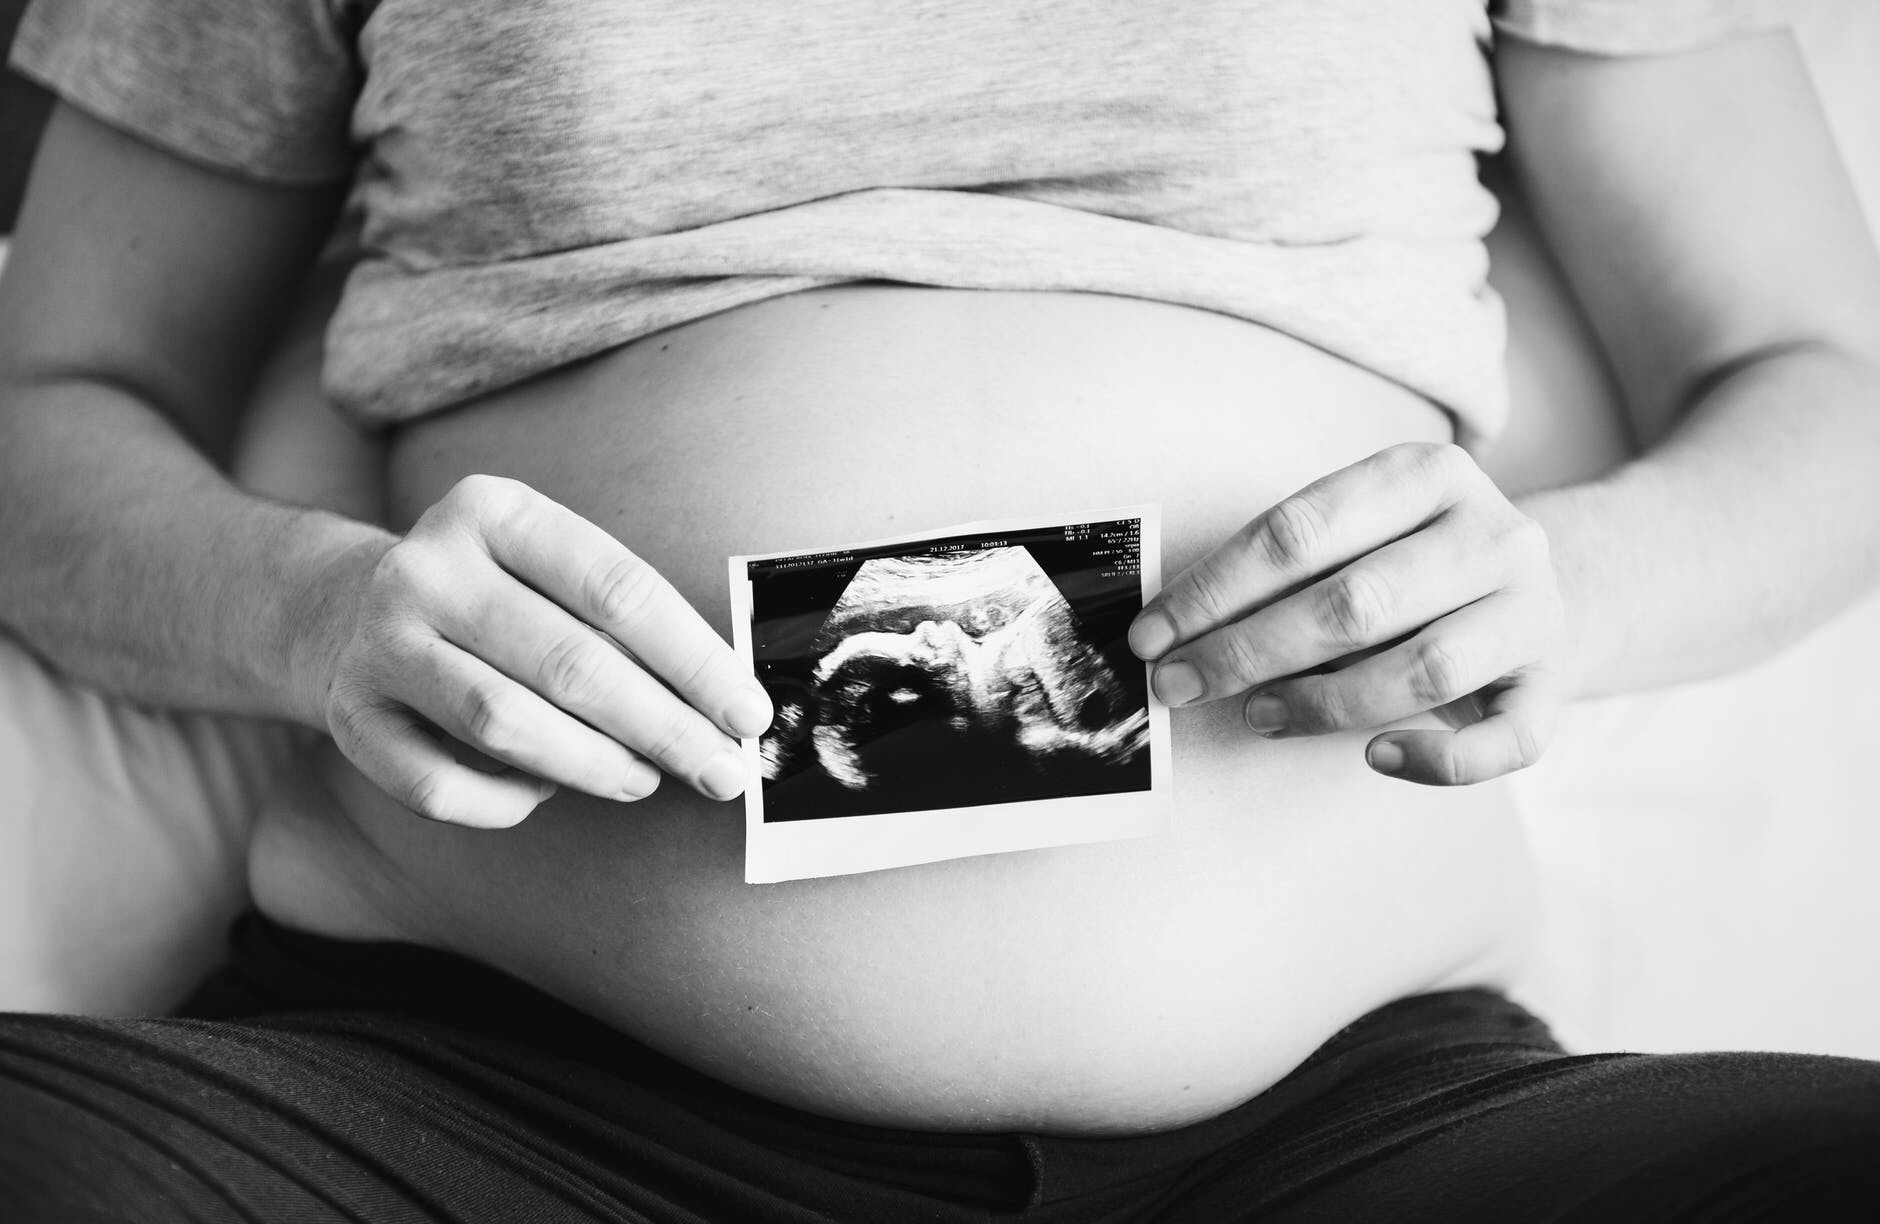 Tennessee Bill Would Ban Abortions After Unborn Baby’s Heartbeat Begins - On Wednesday, January 23, 2019, Tennessee officials meet to discuss this new bill. | Pexel Photo